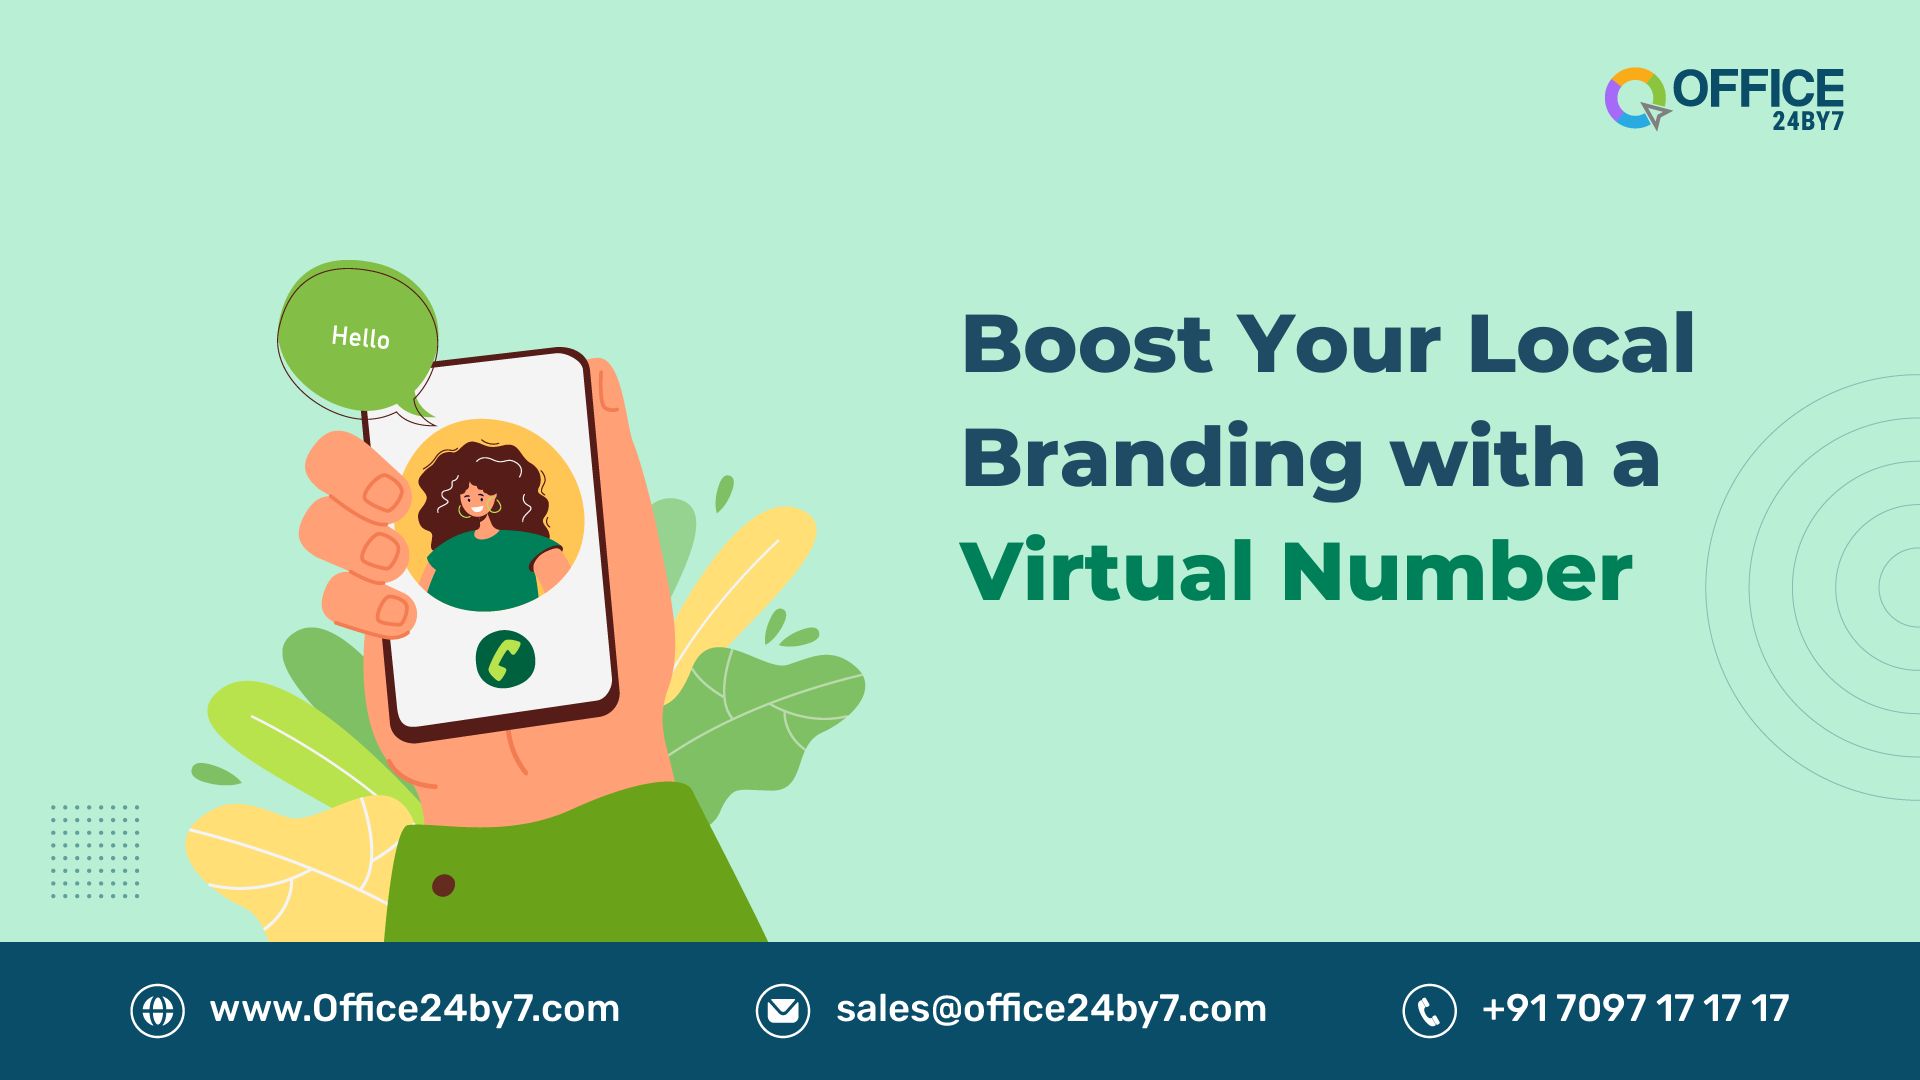 Boost Your Local Branding with a Virtual Number